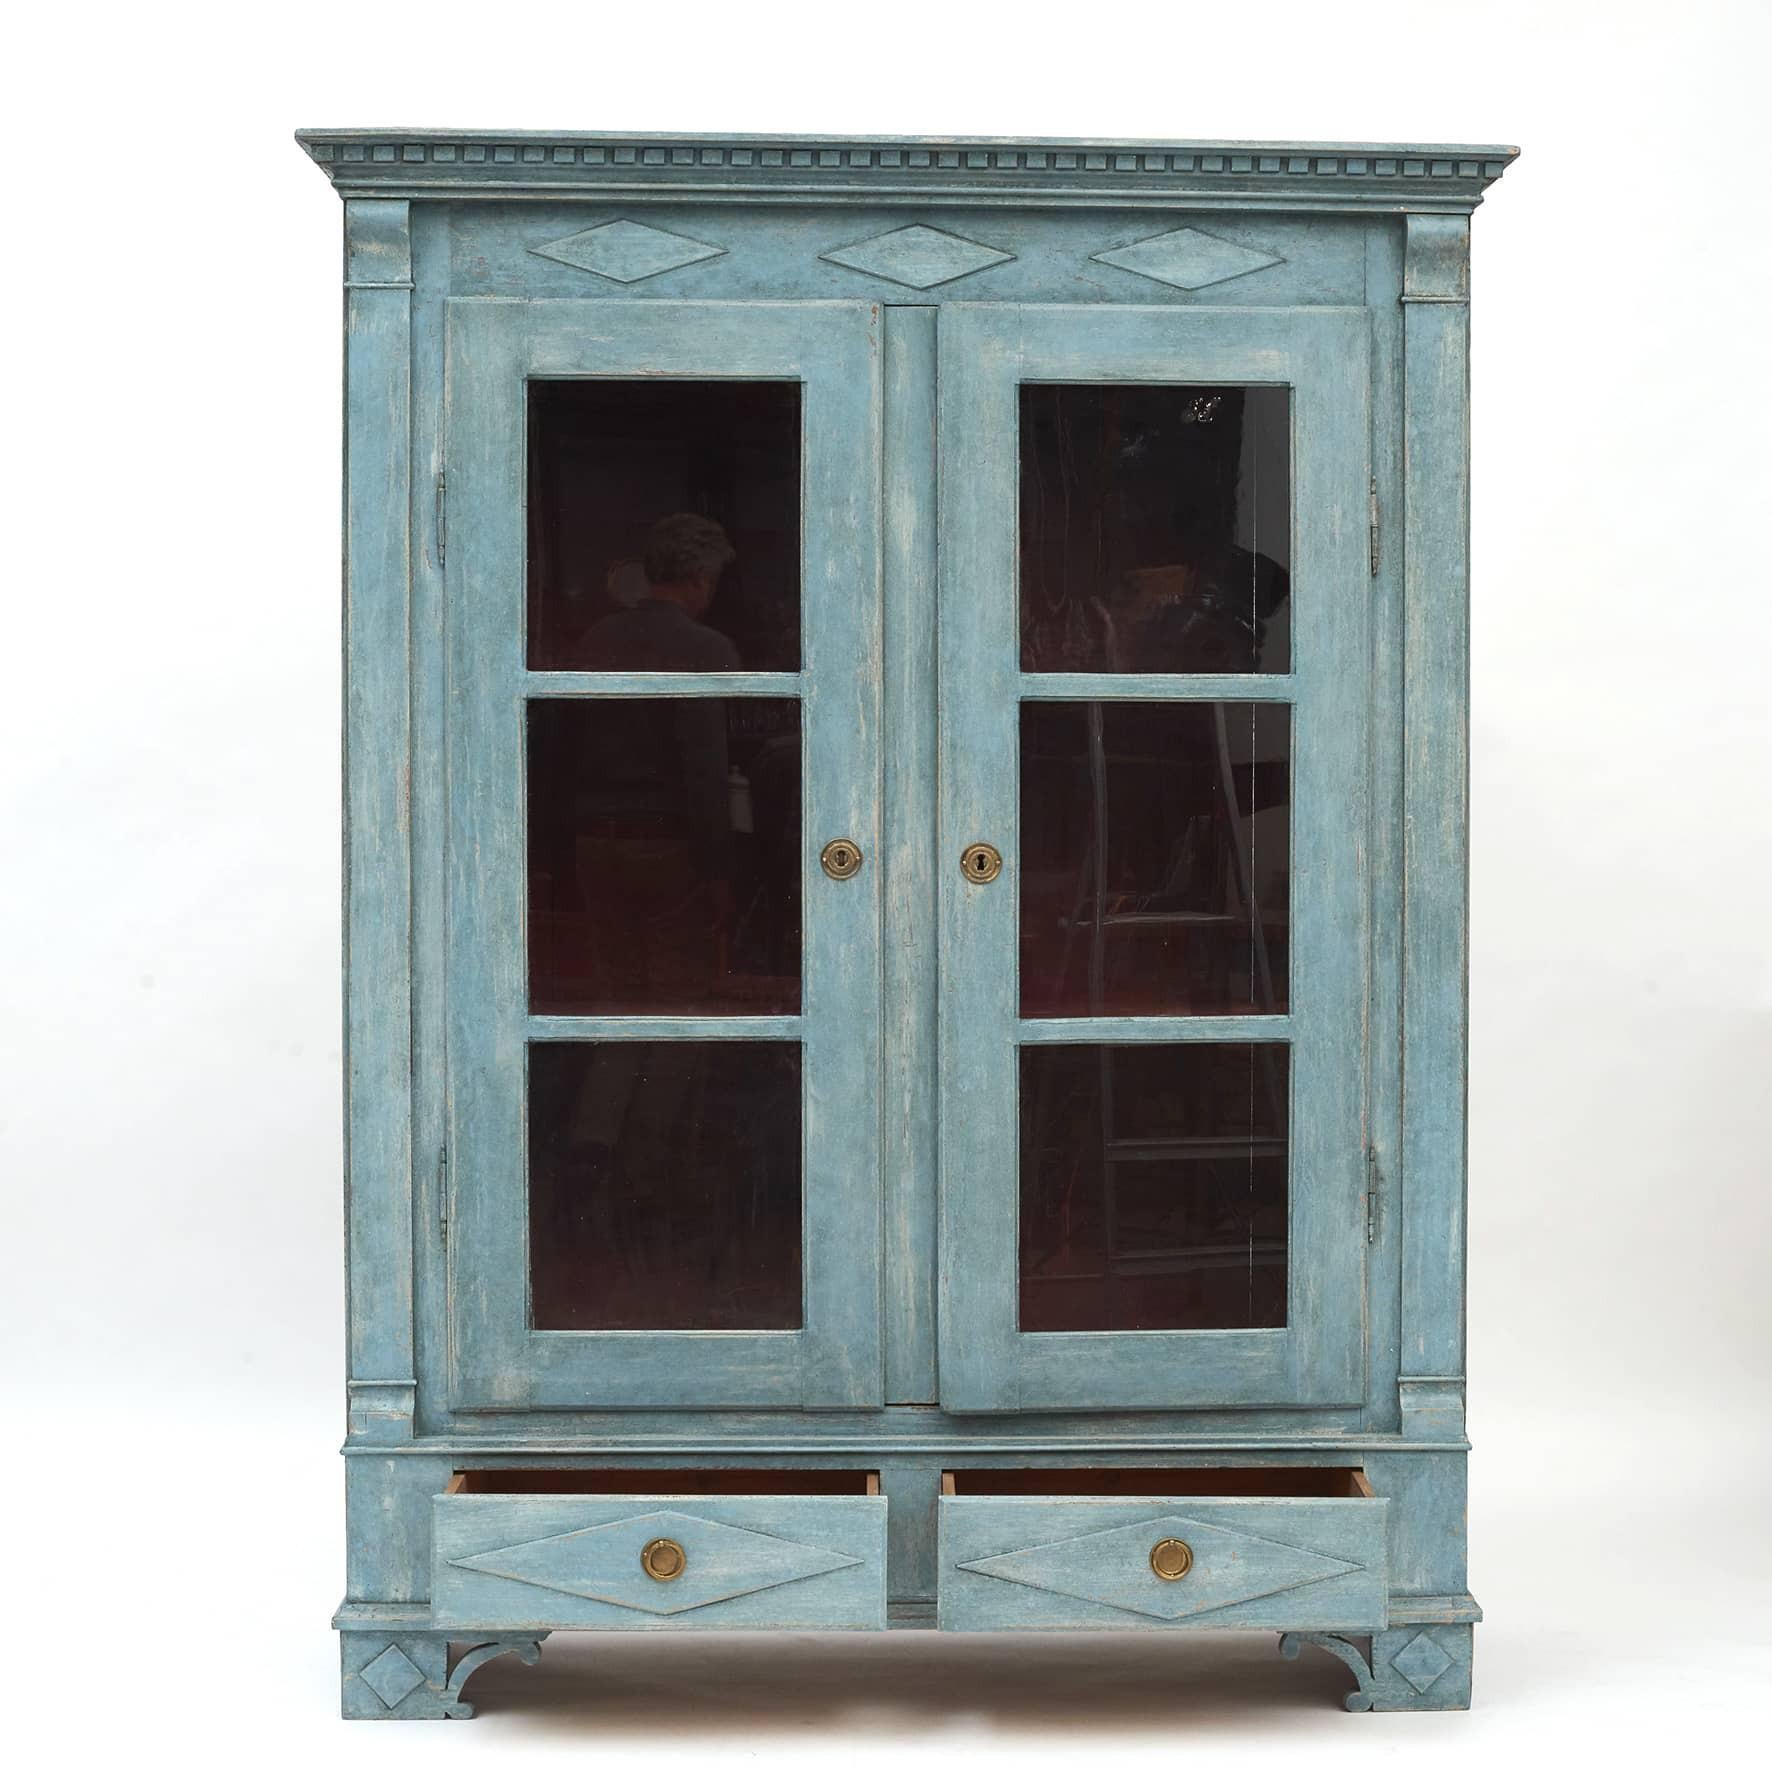 Swedish Gustavian style vitrine/display cabinet.
Pine wood later professional painted blue with wonderful distressed finish, the interior painted in a dark Pompeii red.
Cornice featuring carved dentil and rhombuses molding. Pair of glass doors